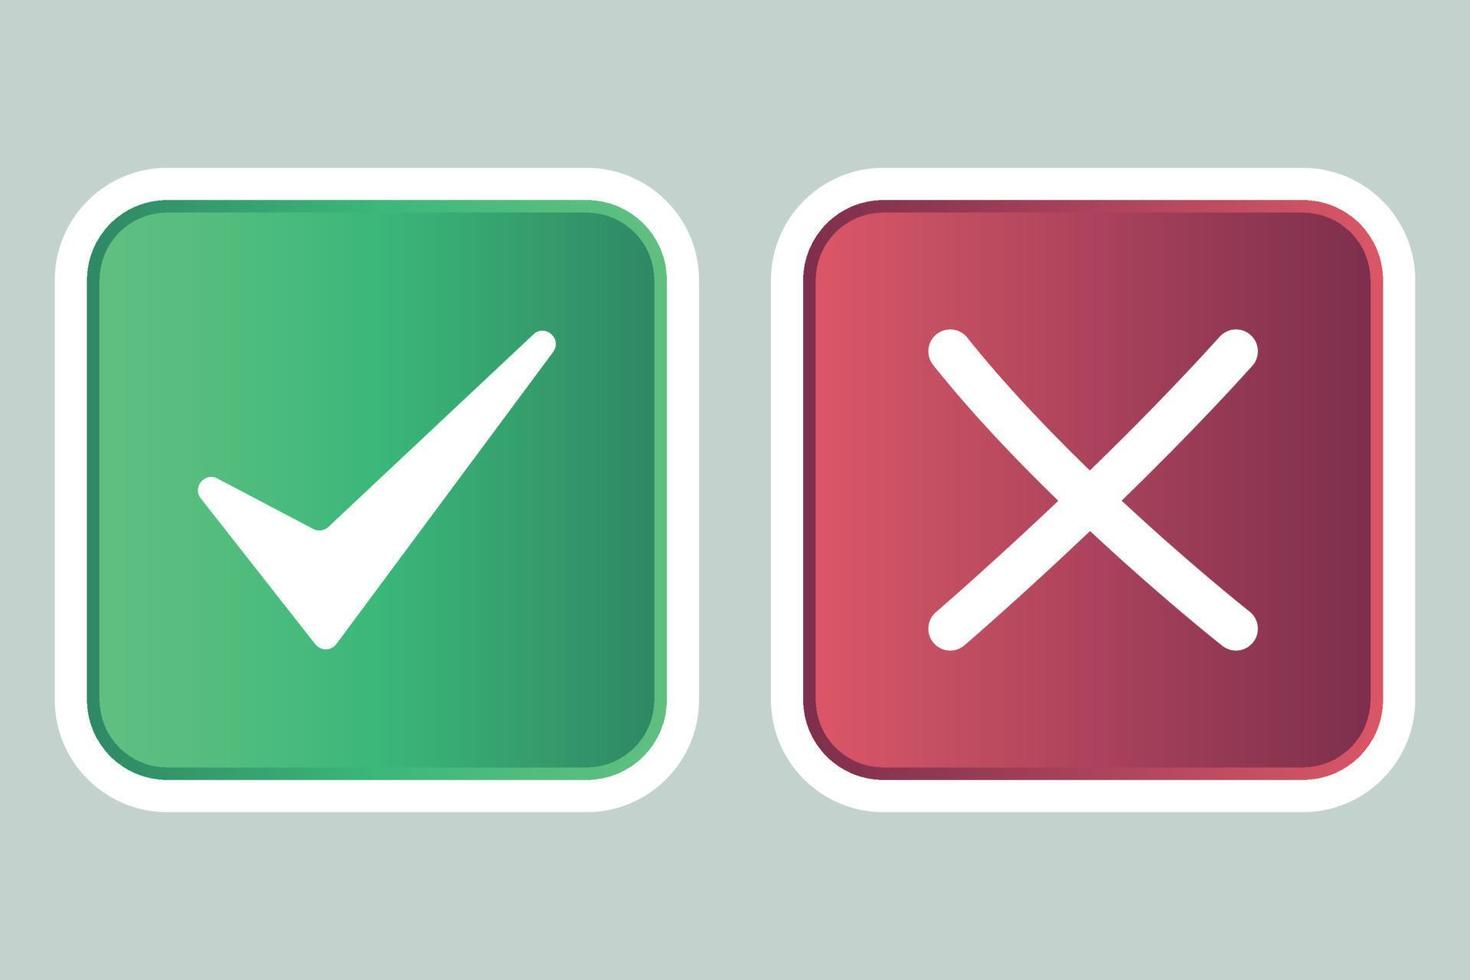 Gradient Check Mark And Cross Set vector